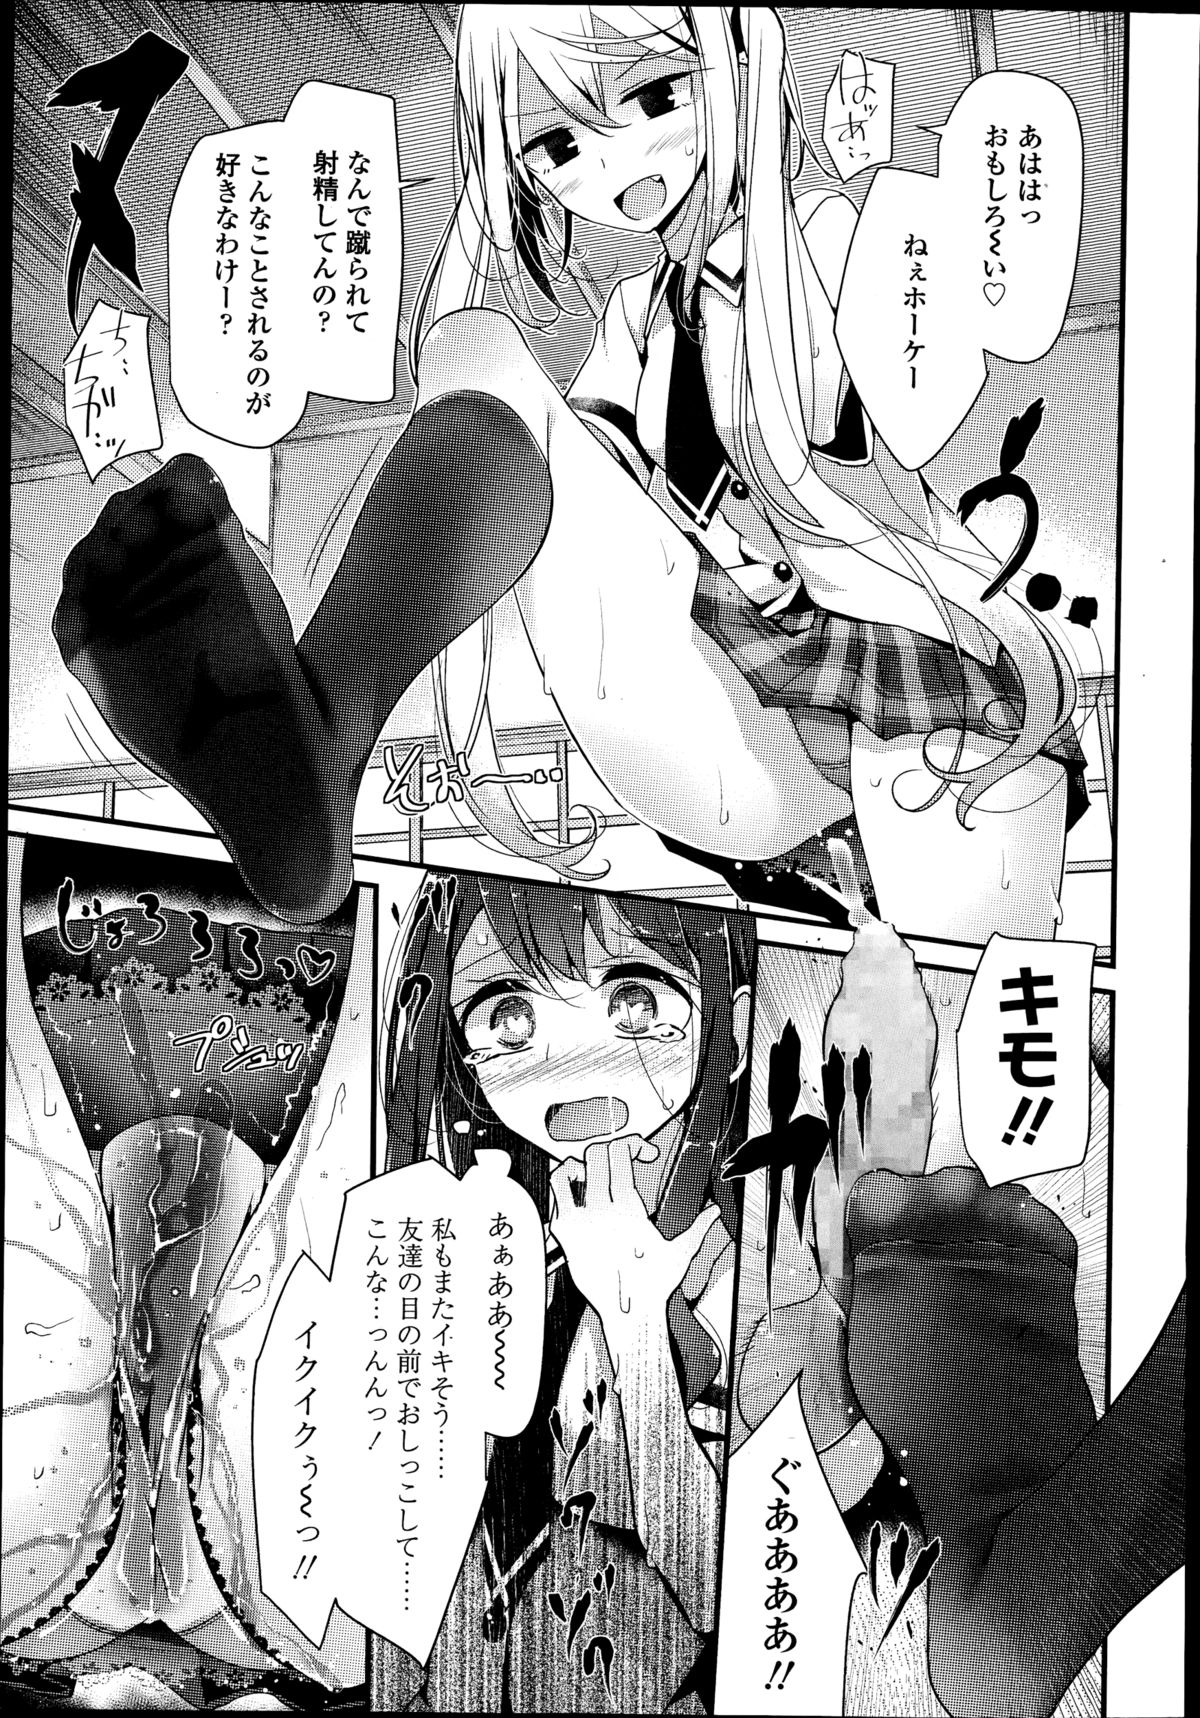 Girls forM Vol. 08 page 35 full